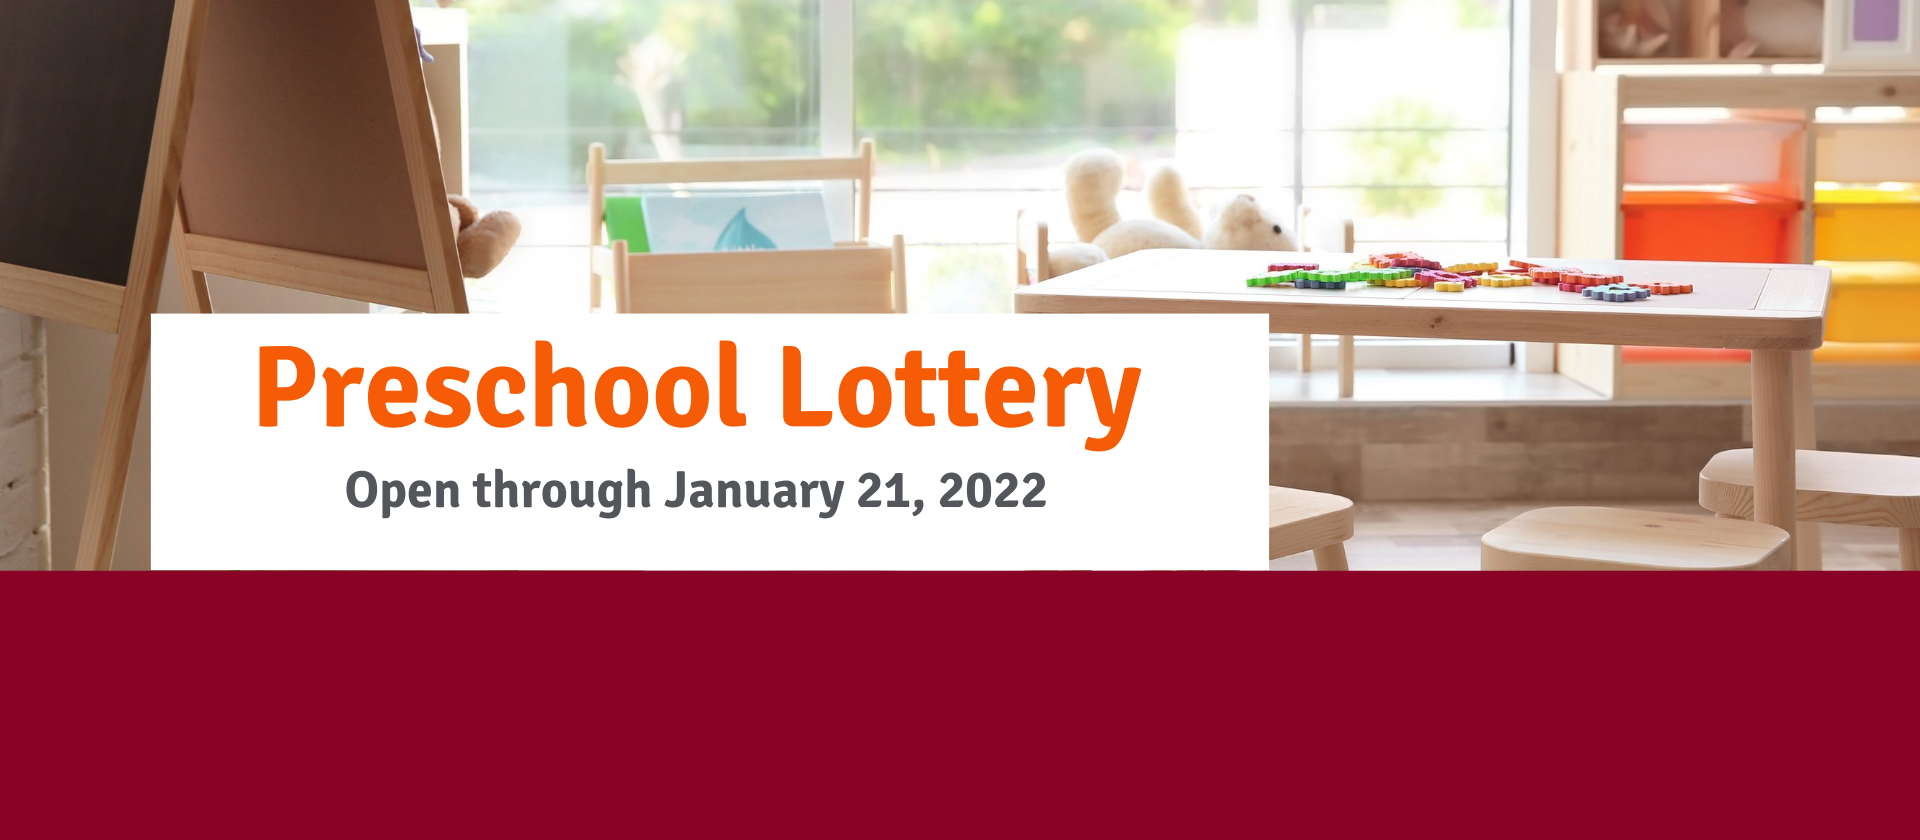 <h2>Preschool Lottery Info</h2>
<p class="p2"><span class="s1">Find out about our preschool program and enter your name.</span></p>
<p>&nbsp;</p>
<a href="https://ec.bps101.net/preschool-program/" class="button ">HERE</a>
